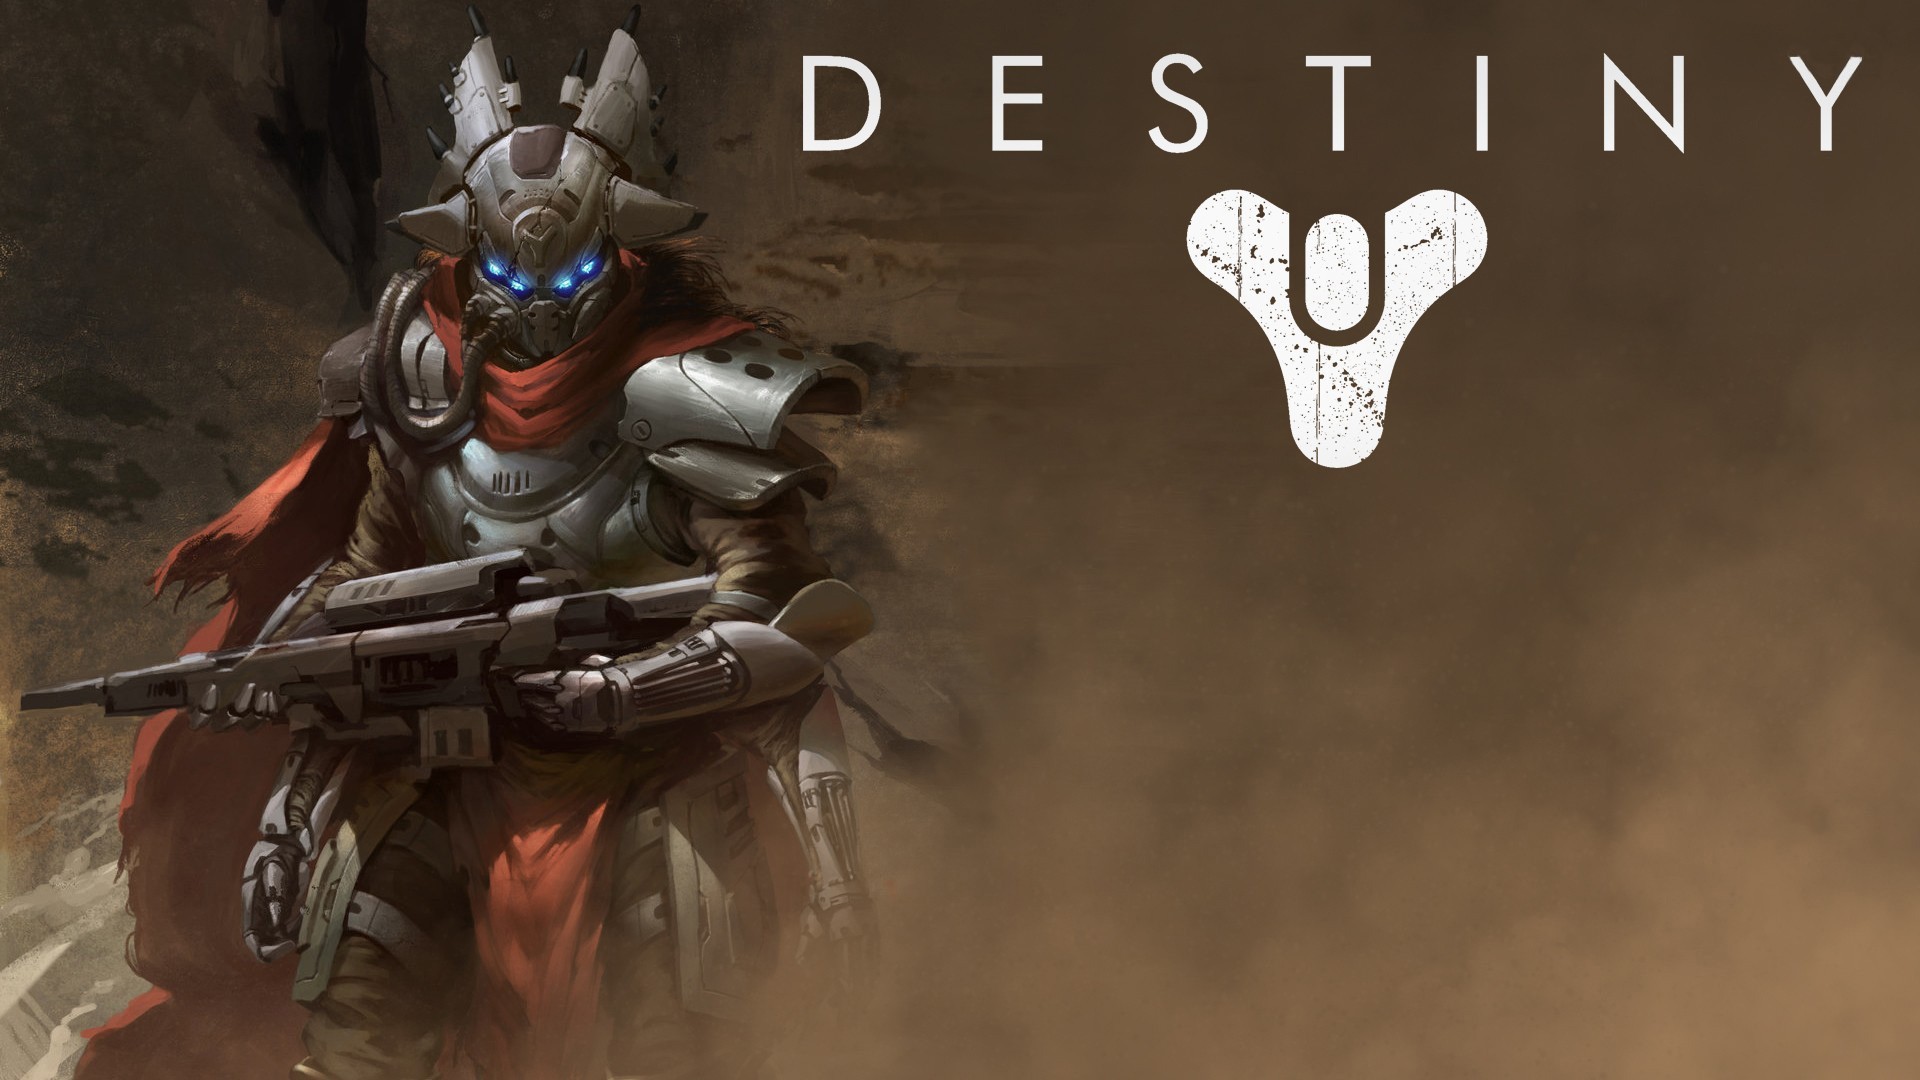 General 1920x1080 video games Destiny (video game) Bungie PC gaming weapon science fiction video game art